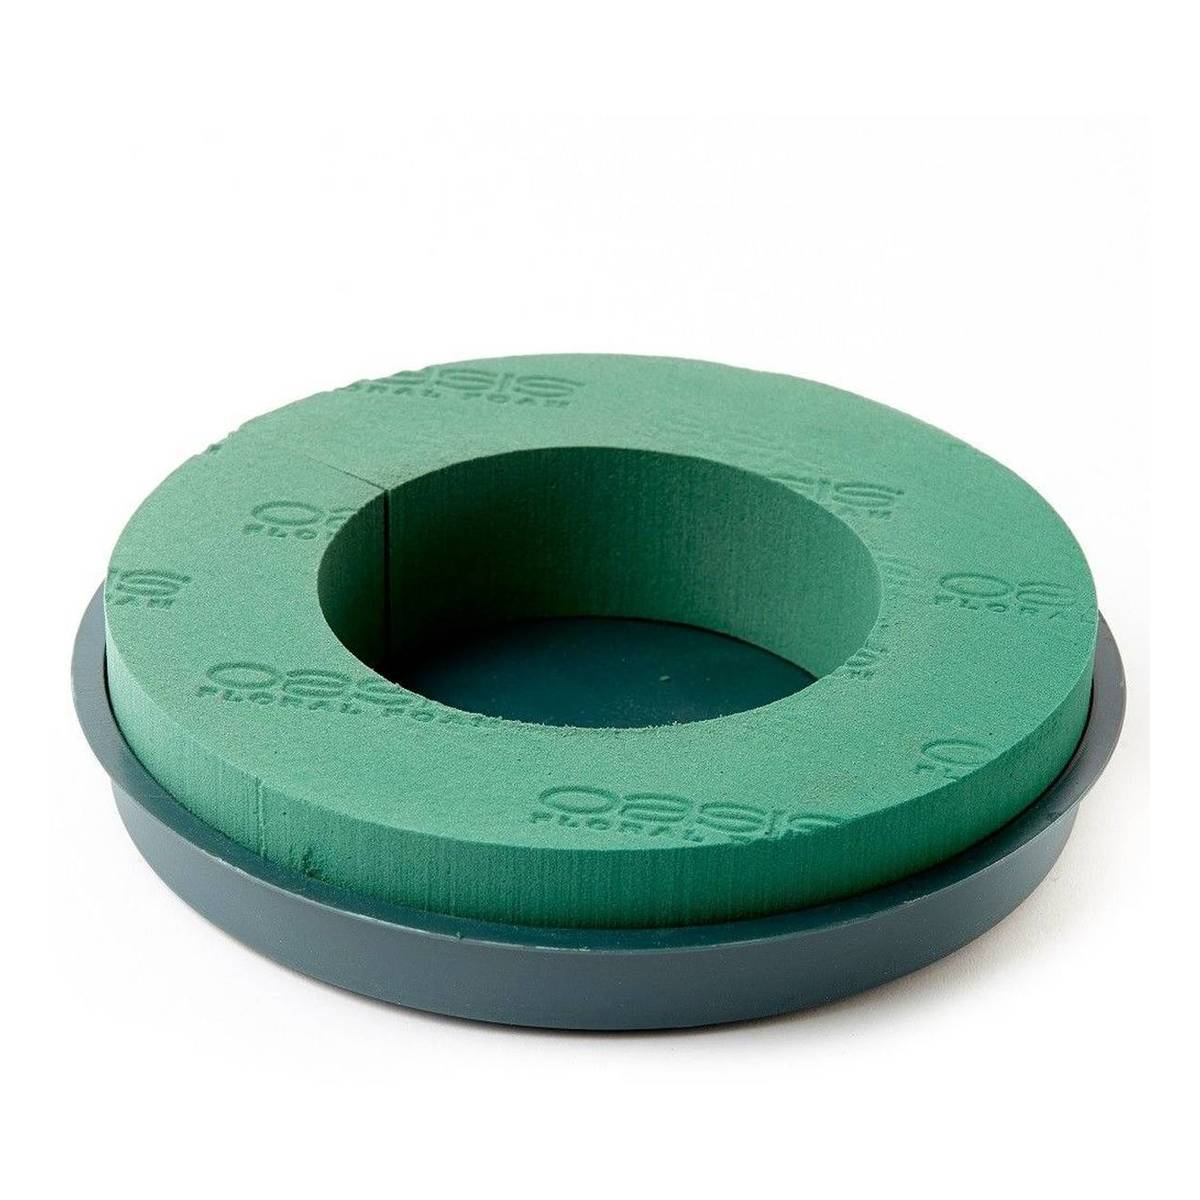 Oasis Naylorbase Wreath rings 12 inch Box of 12